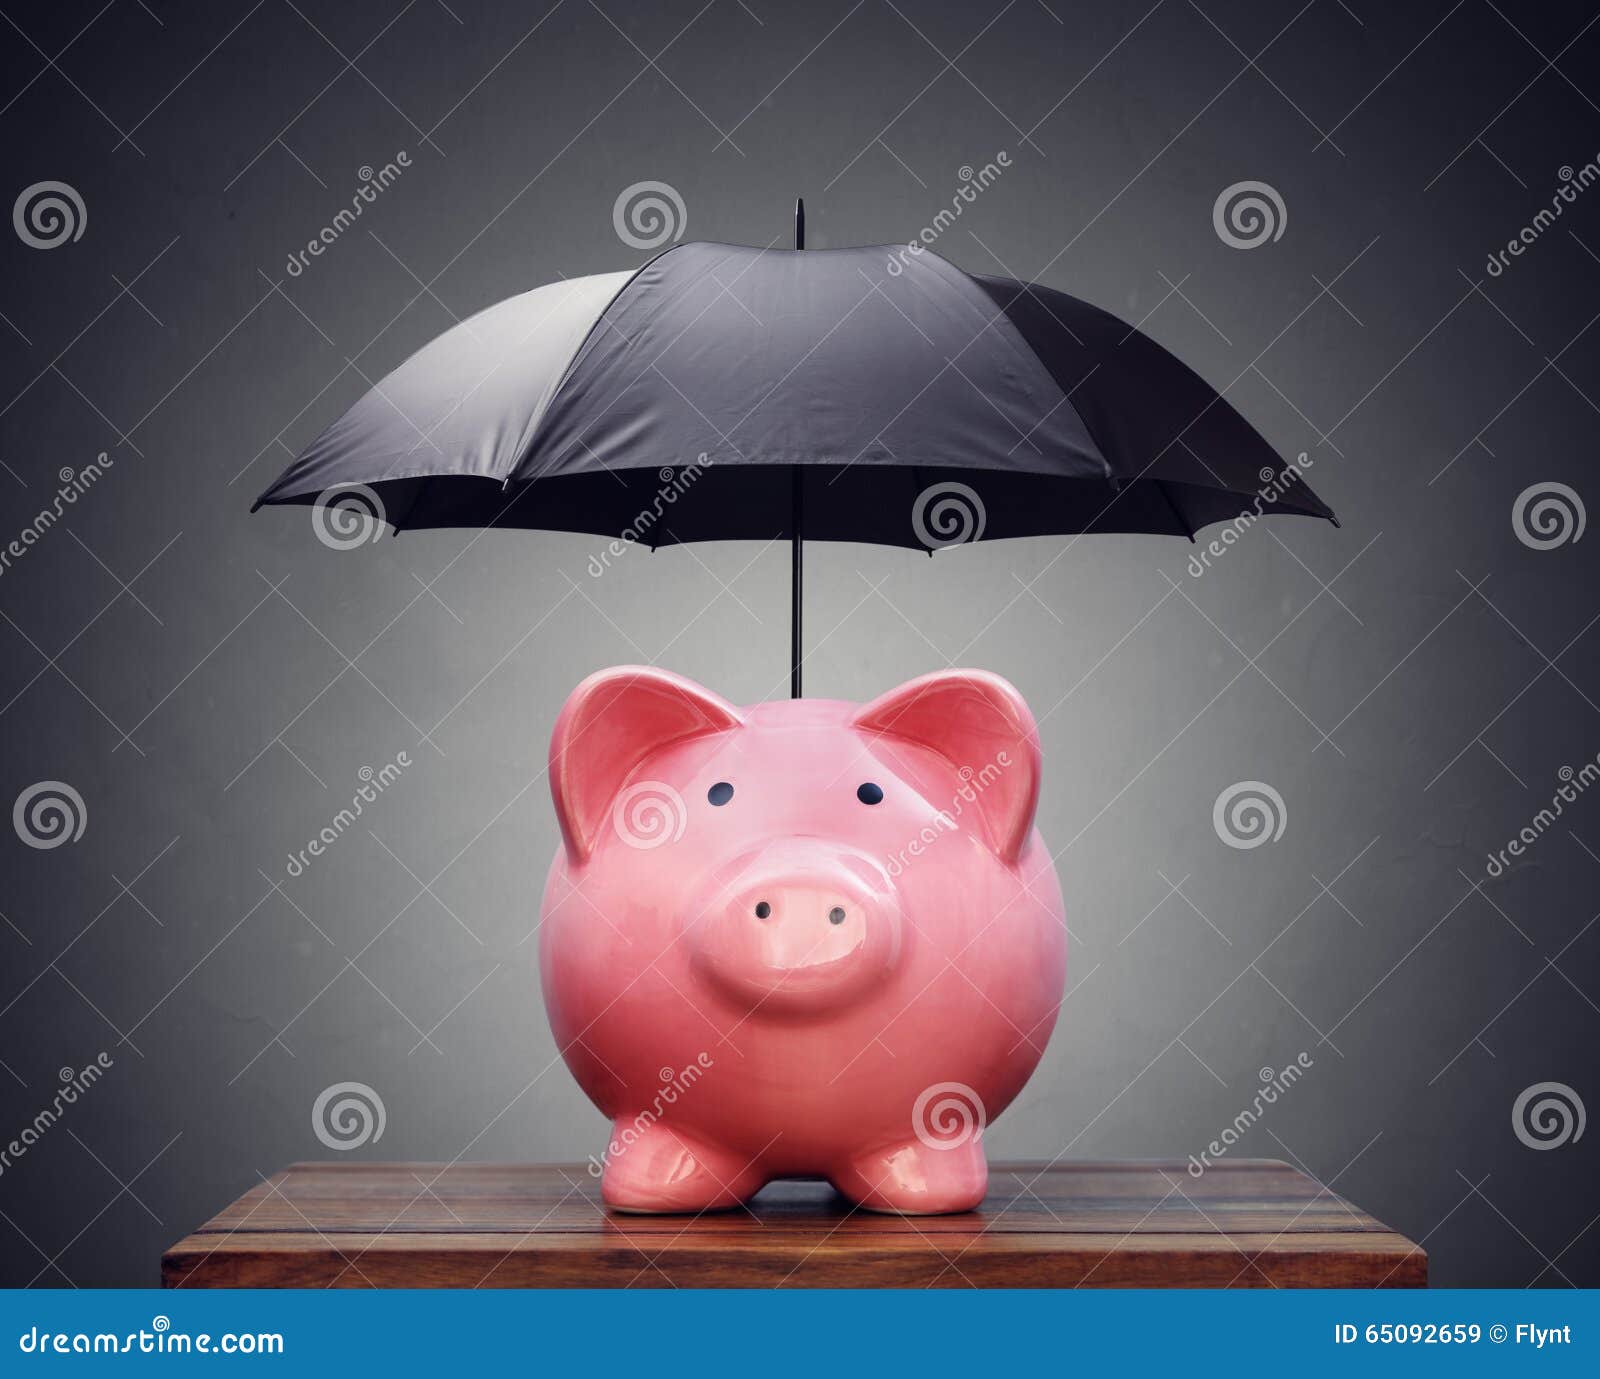 financial insurance or protection piggy bank with umbrella